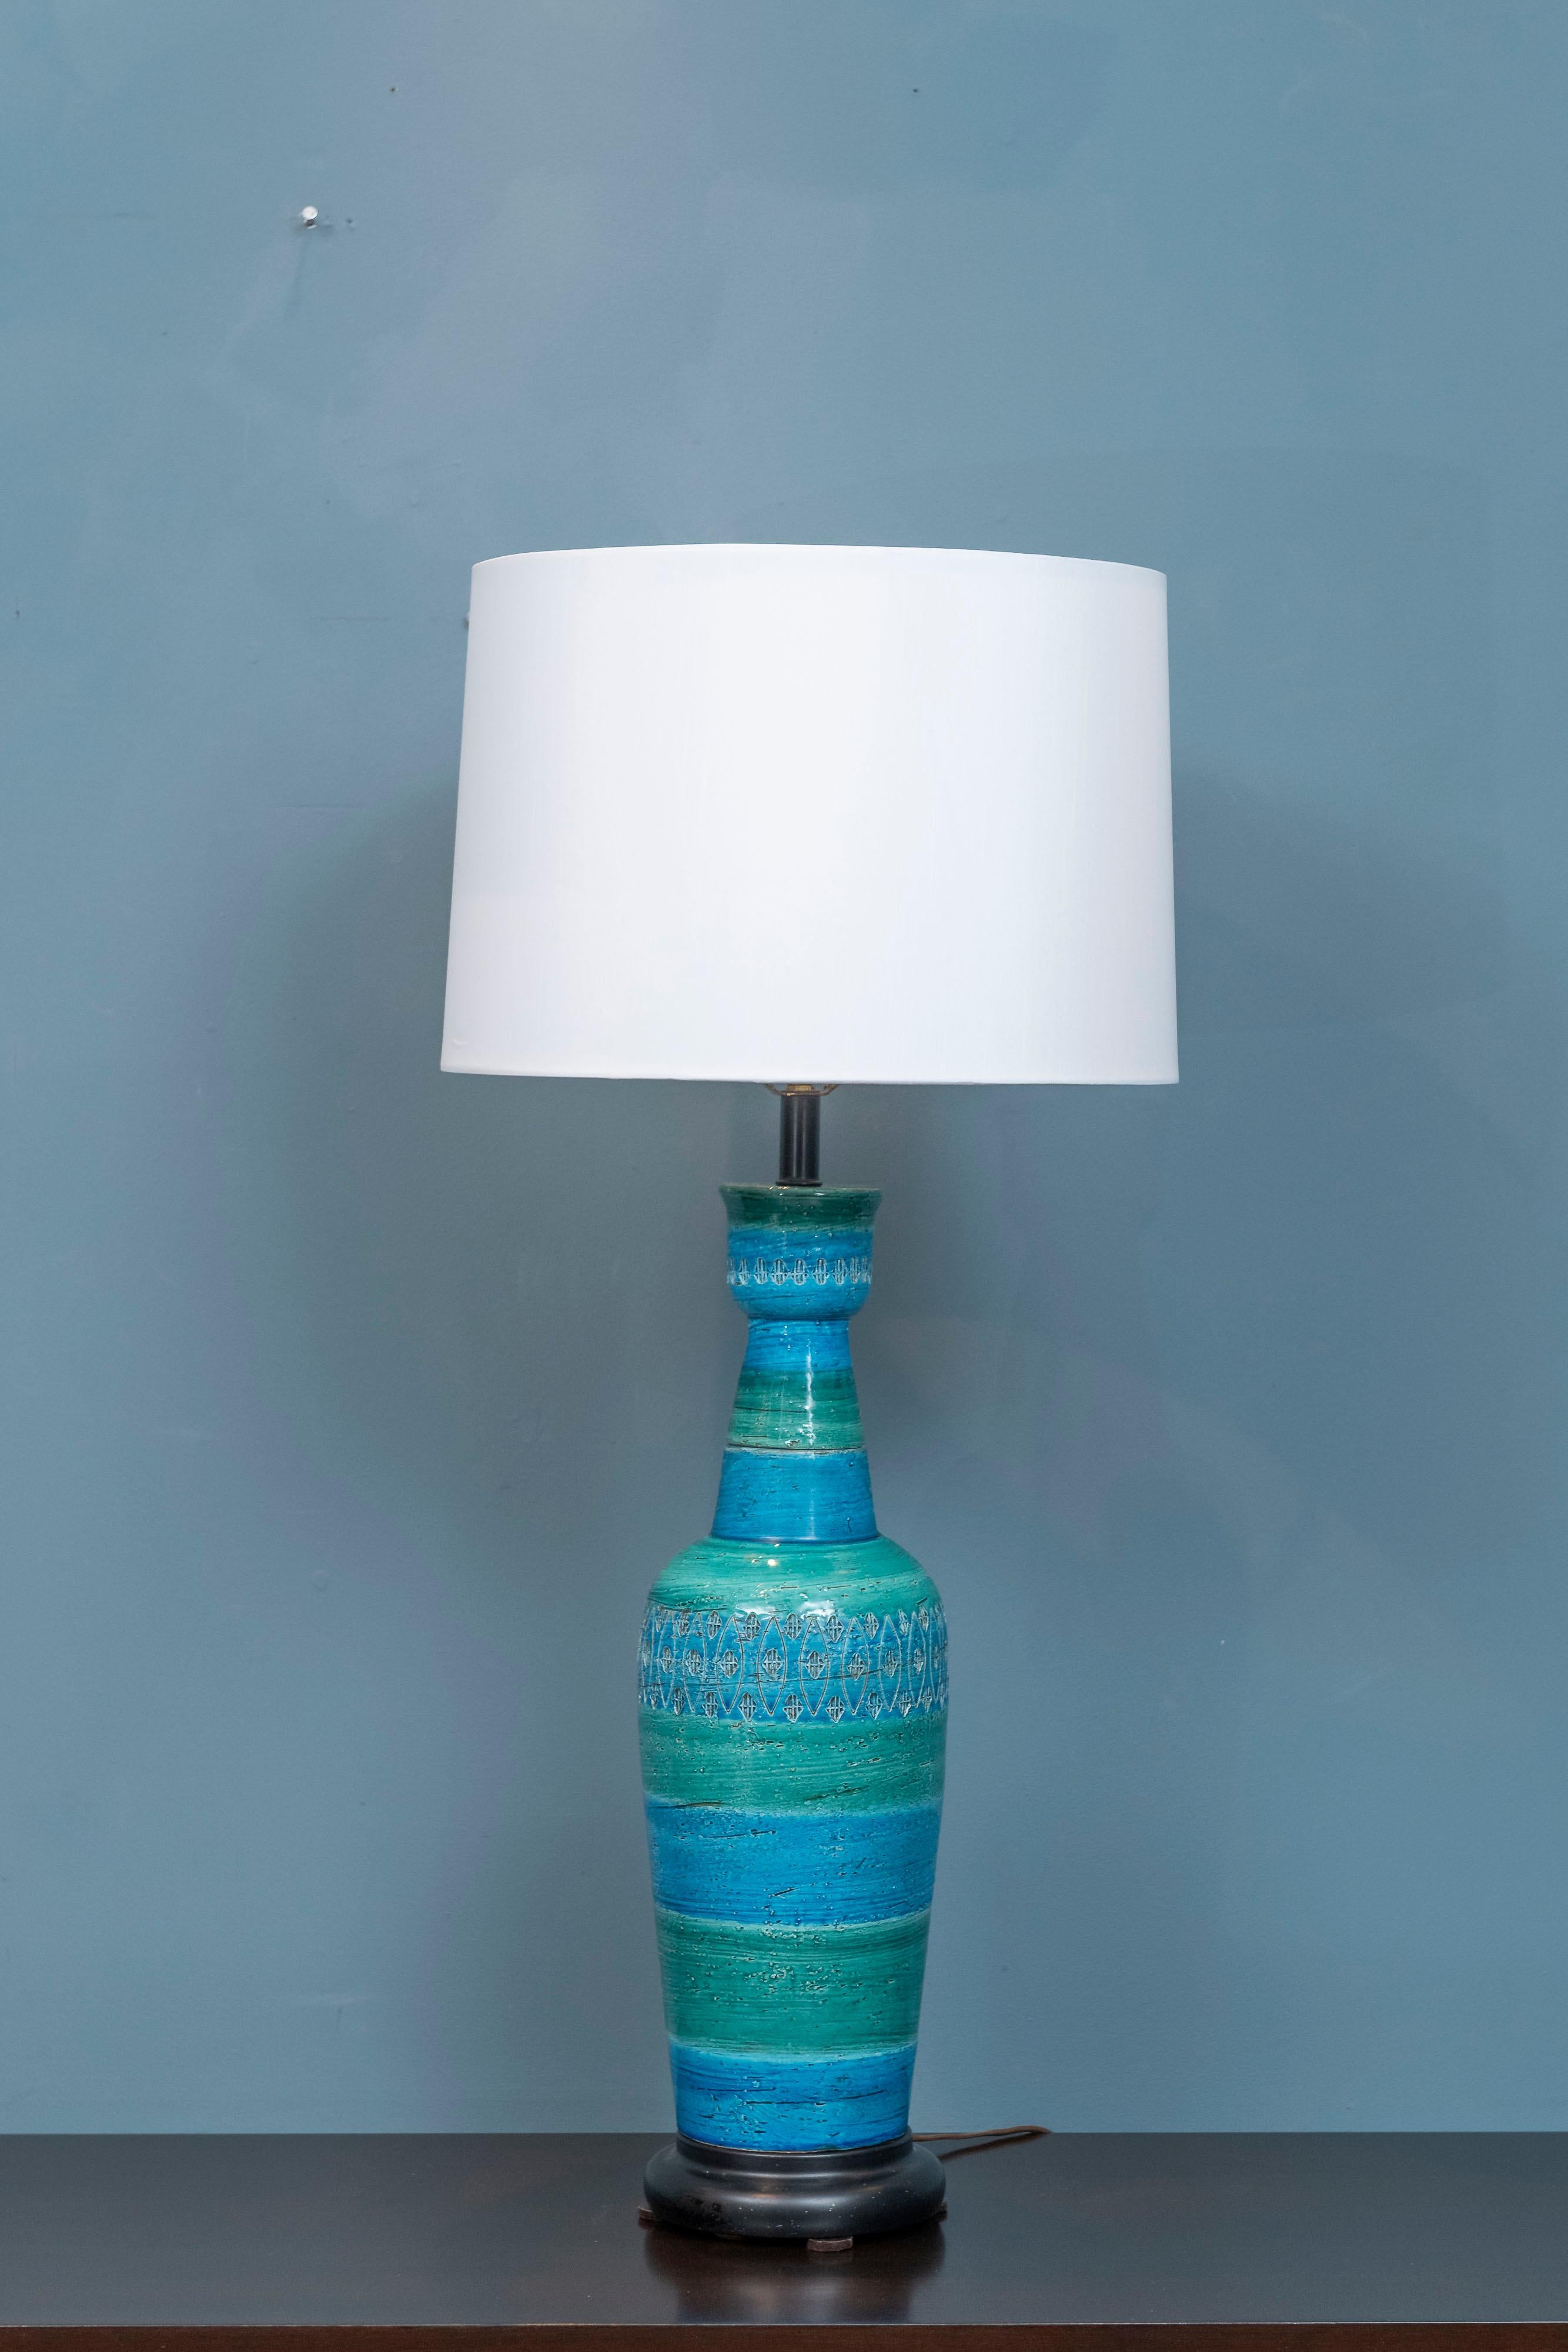 Bitossi Aldo Londi ceramic lamp with encased decoration to the center and top in Rimini blue and ocean green colors. Classical form body that is impressive in person in very good original condition. Lamp base shows some scuffs and needs a new cloth